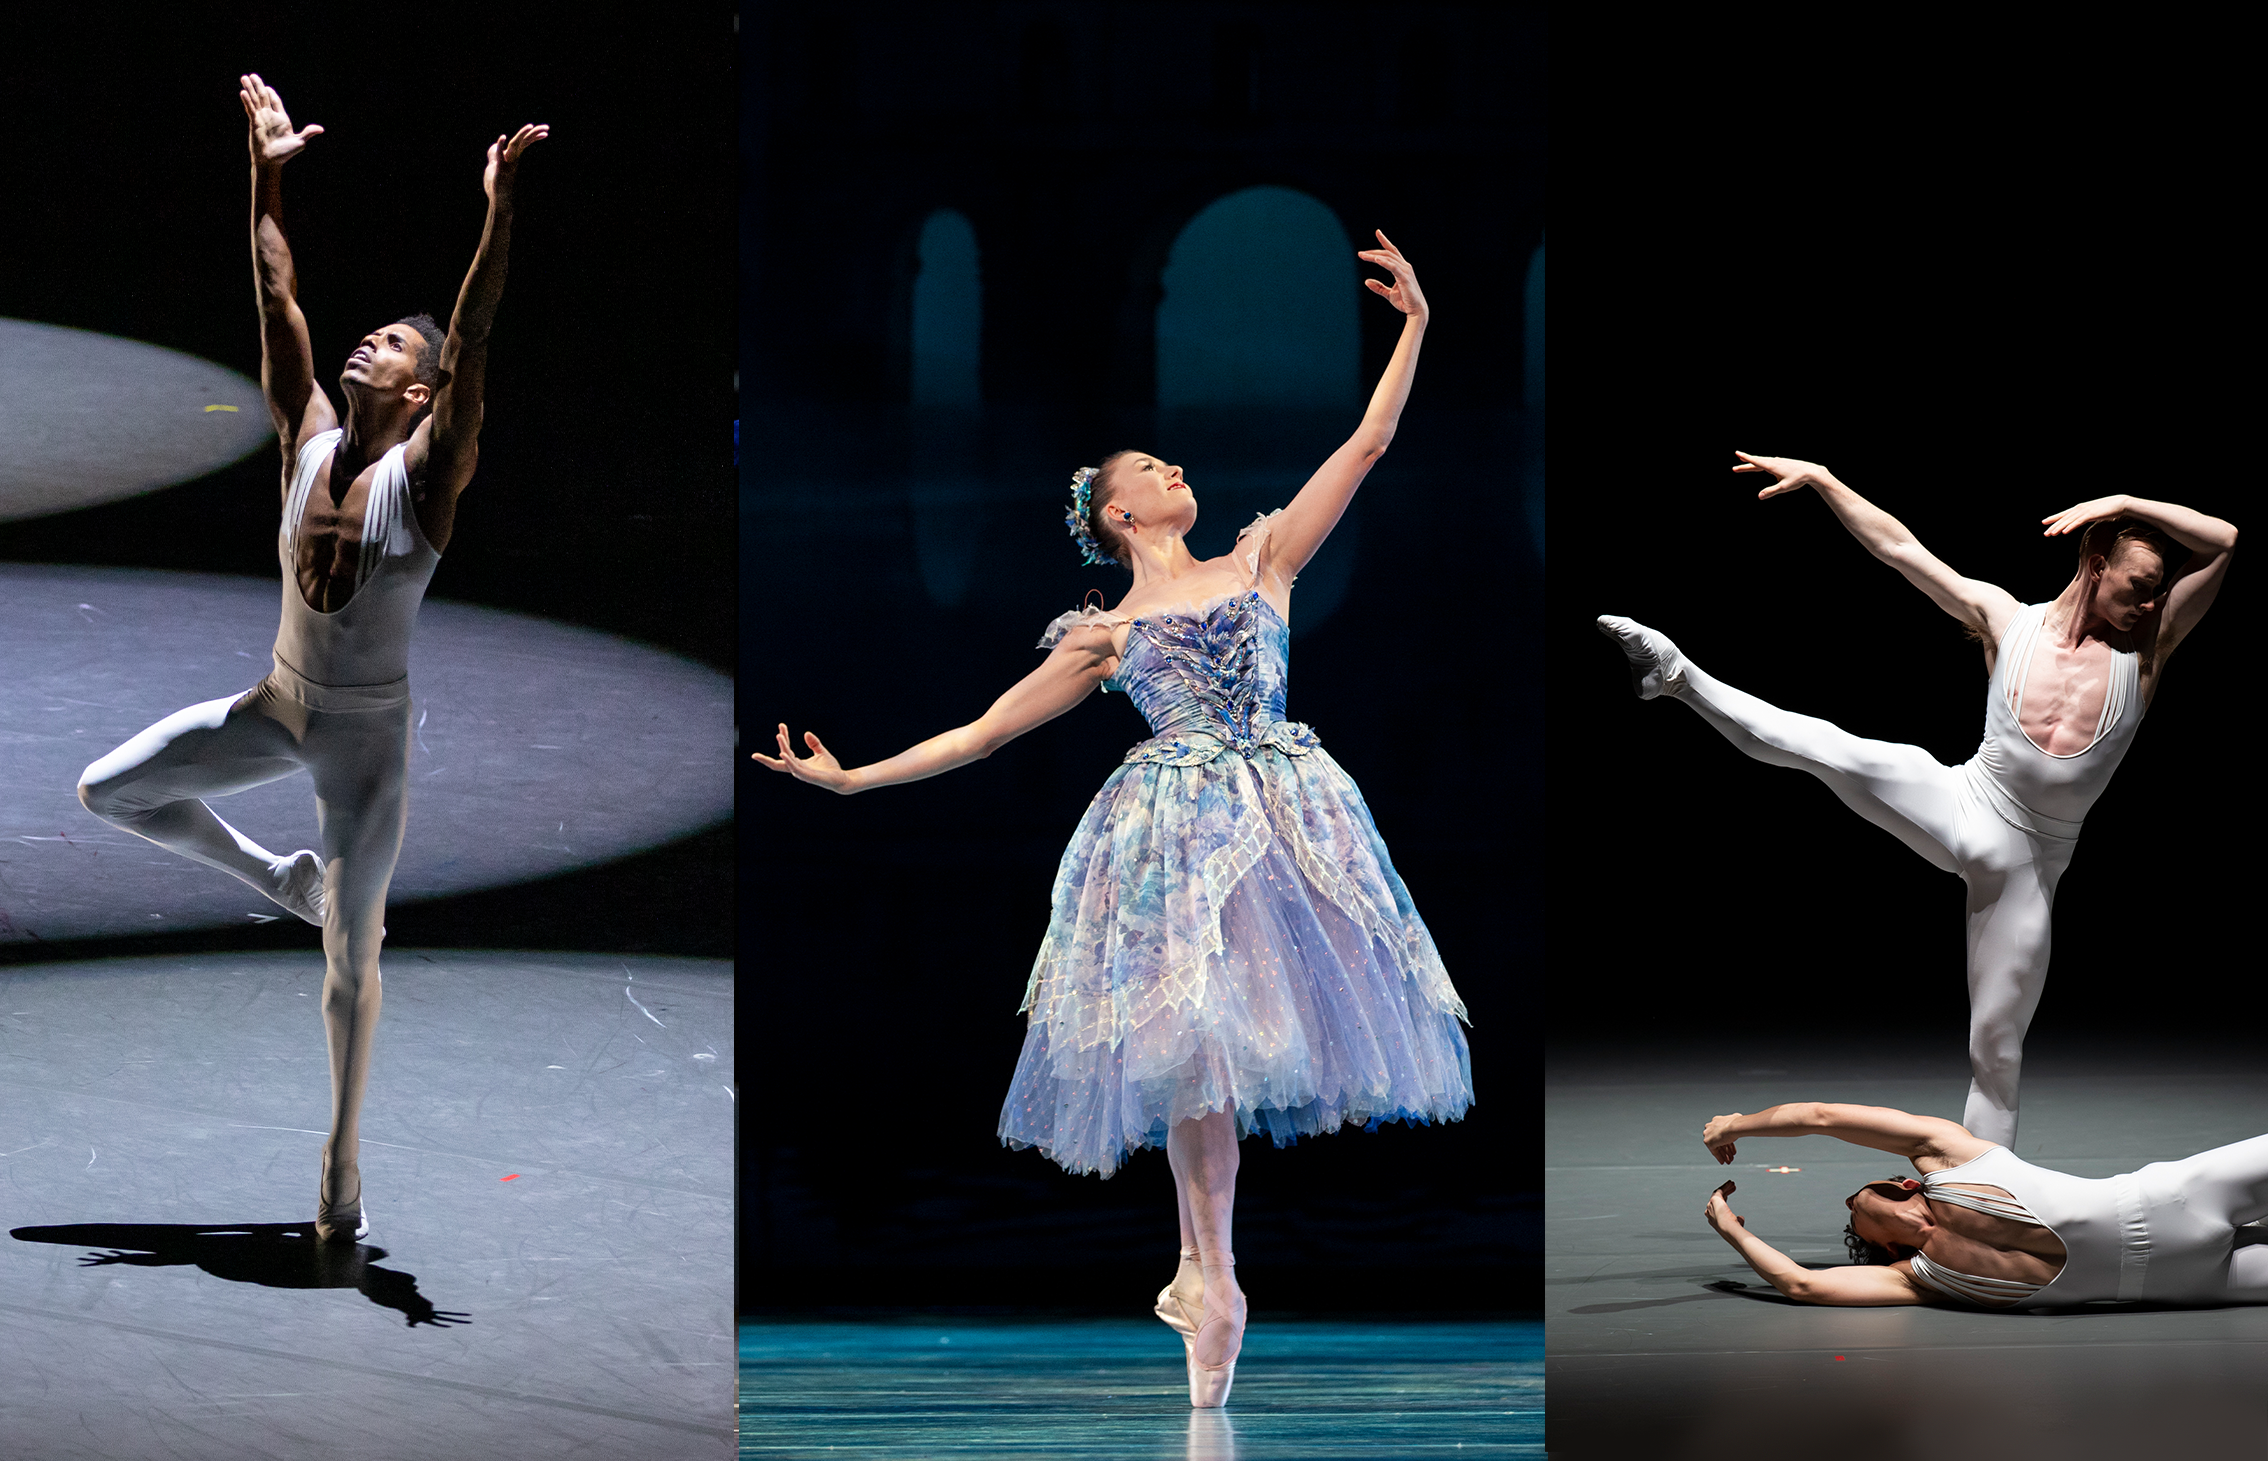 Three dancers are shown in a collage of onstage images. Jonathan Batista reaches up in passe wearing a white unitard, in a spotlight; Cecilia Iliesiu poses in sous-sus in a romantic lilac tutu; James Kirby Rogers fondus in an la seconde extension in a white unitard, another dancer wrapped around his bottom foot.